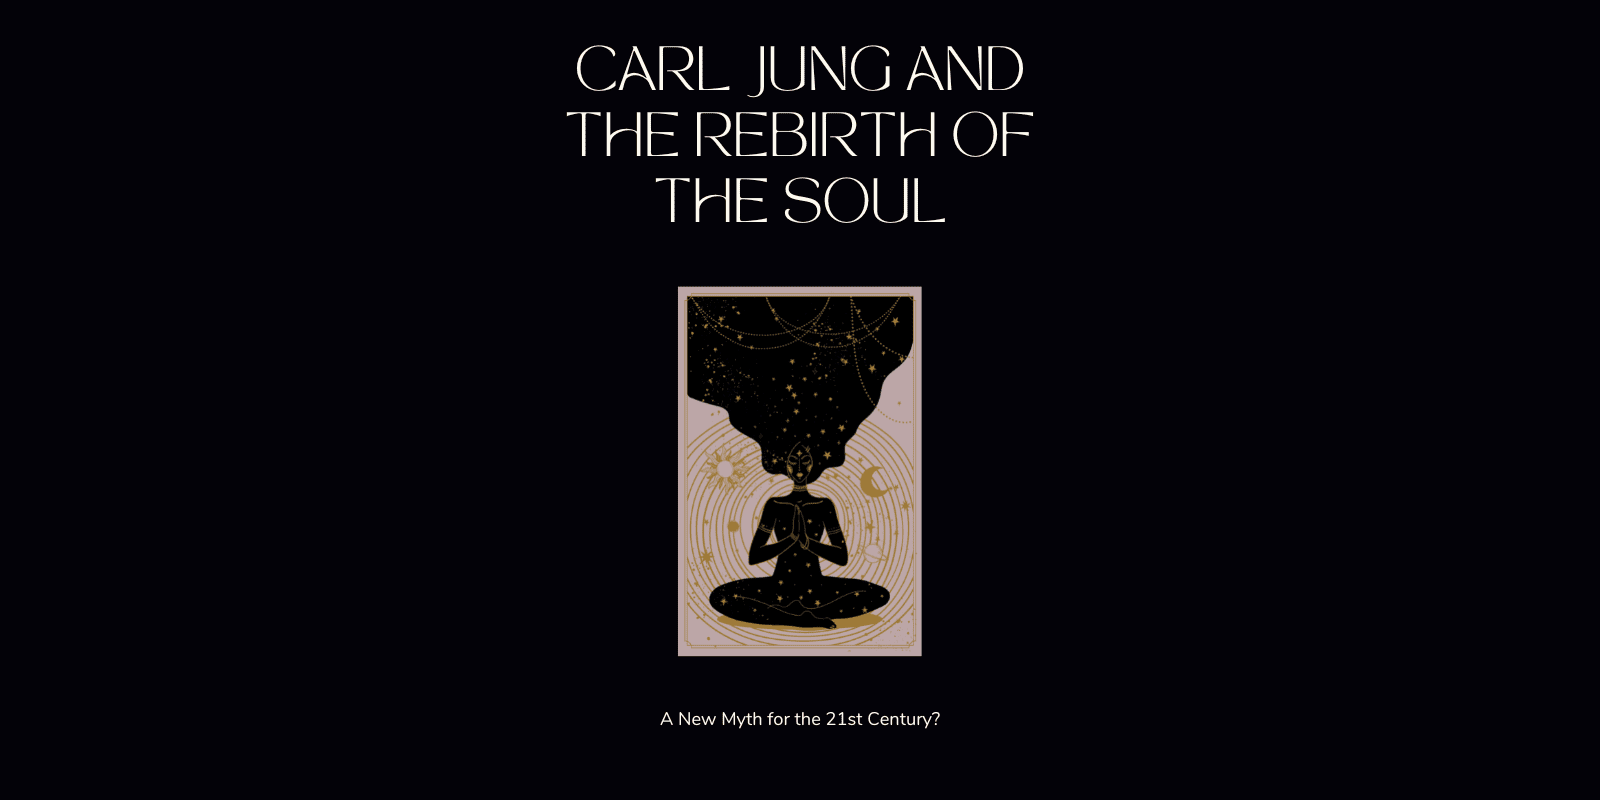 Carl Jung and the Rebirth of the Soul: A New Myth for the 21st